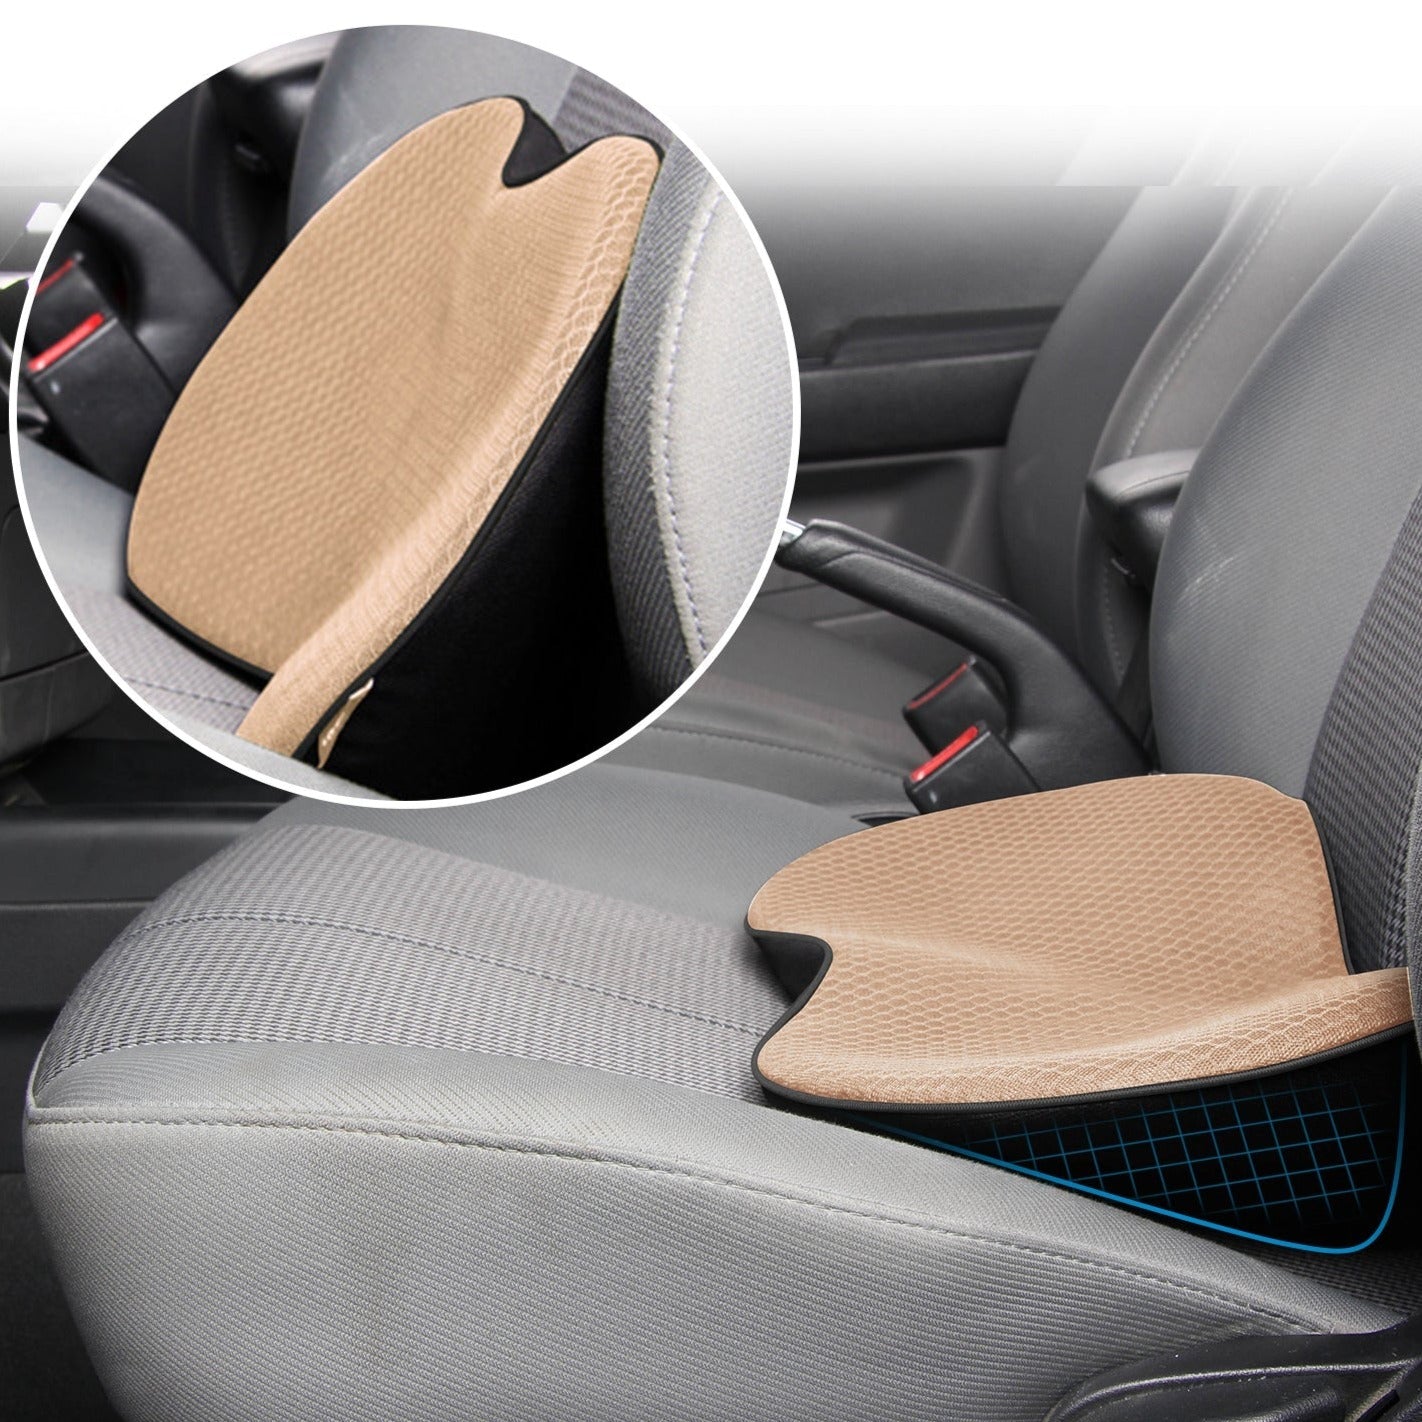 Getphonery Car Seat Cushion for Shorter Drivers Booster Height Riser Adults Short Person Wedge Back Pain Lumbar Support Driving Truck Pillow, Red